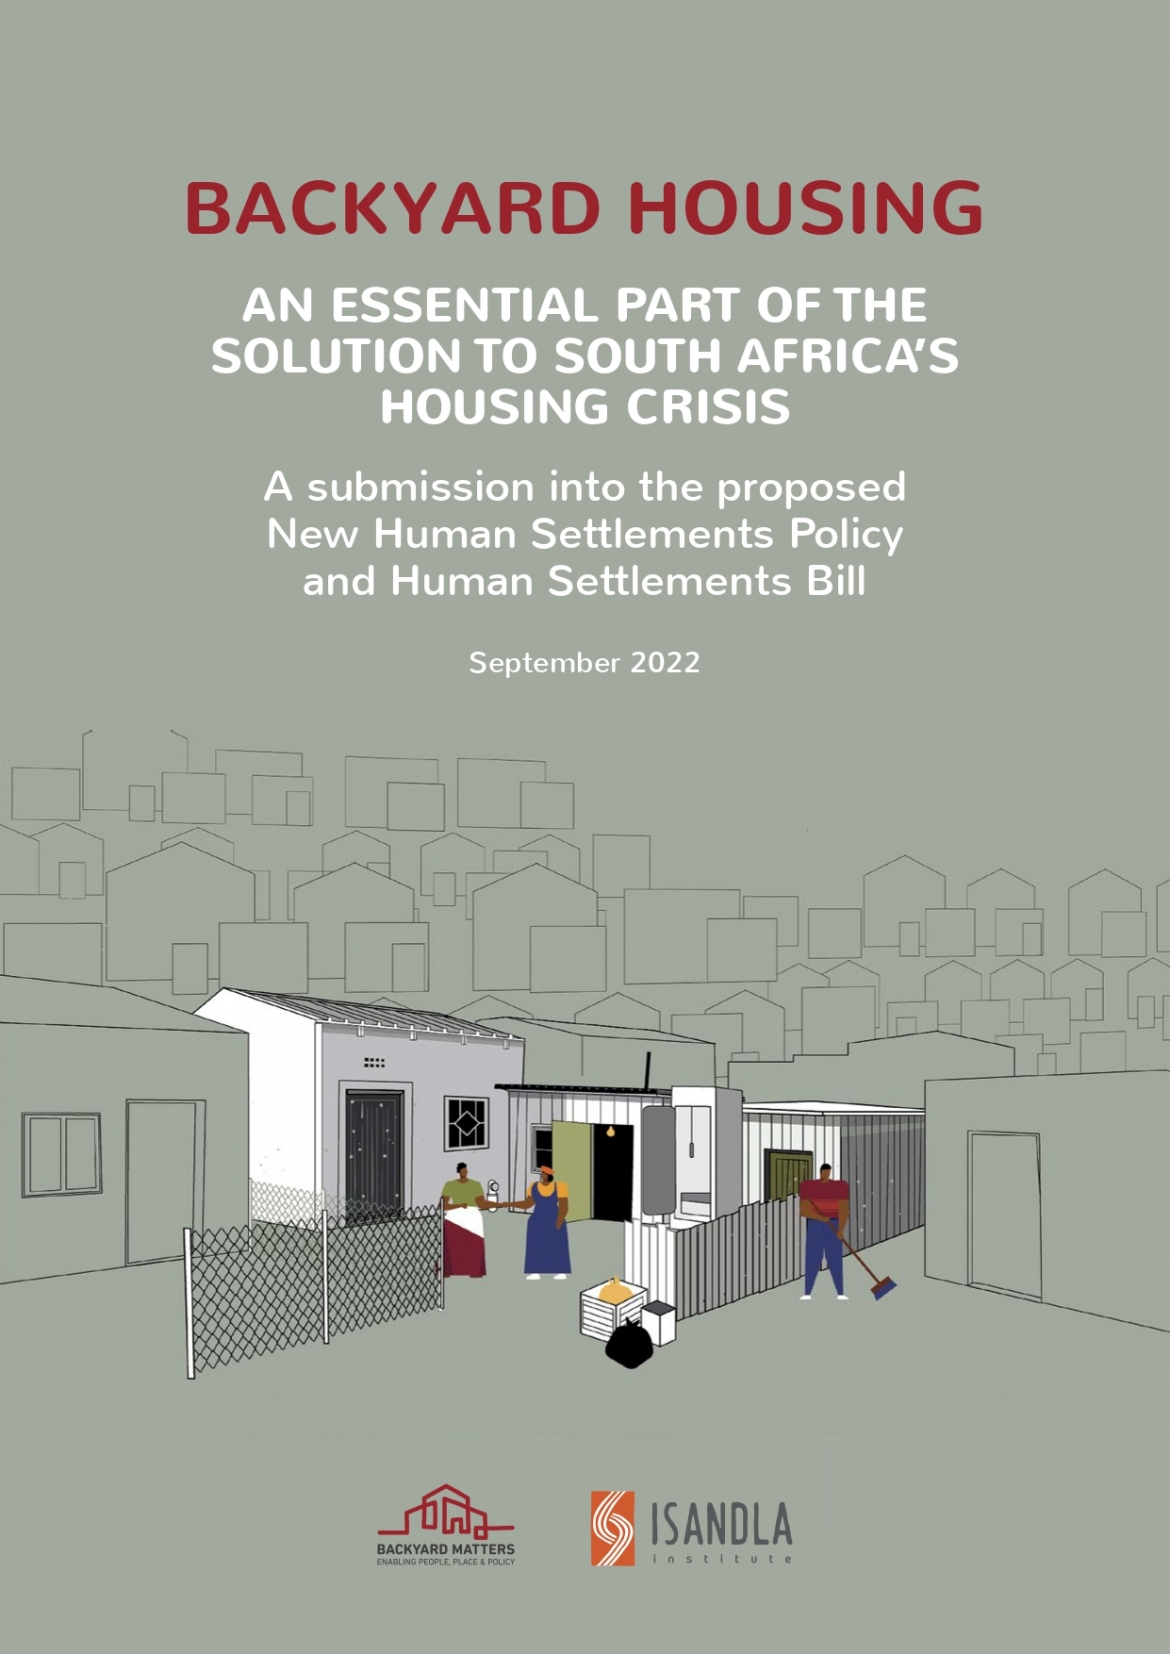 Backyard housing: an essential part of the solution to South Africa’s housing crisis - a submission into the proposed new Human Settlements policy and Human Settlements bill